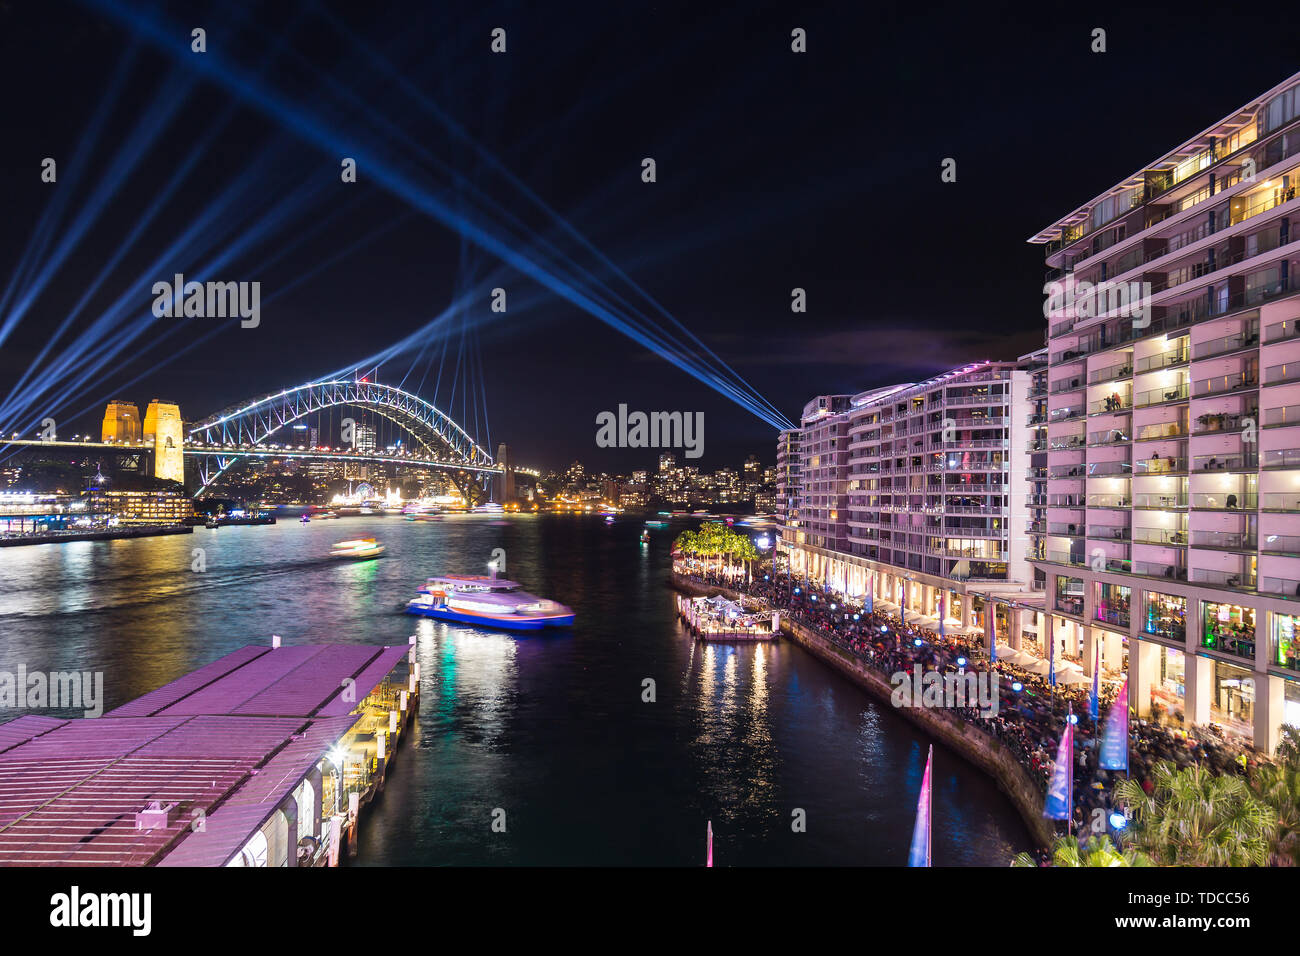 Vivid Sydney. The largest festival of light in the southern hemisphere. Stock Photo